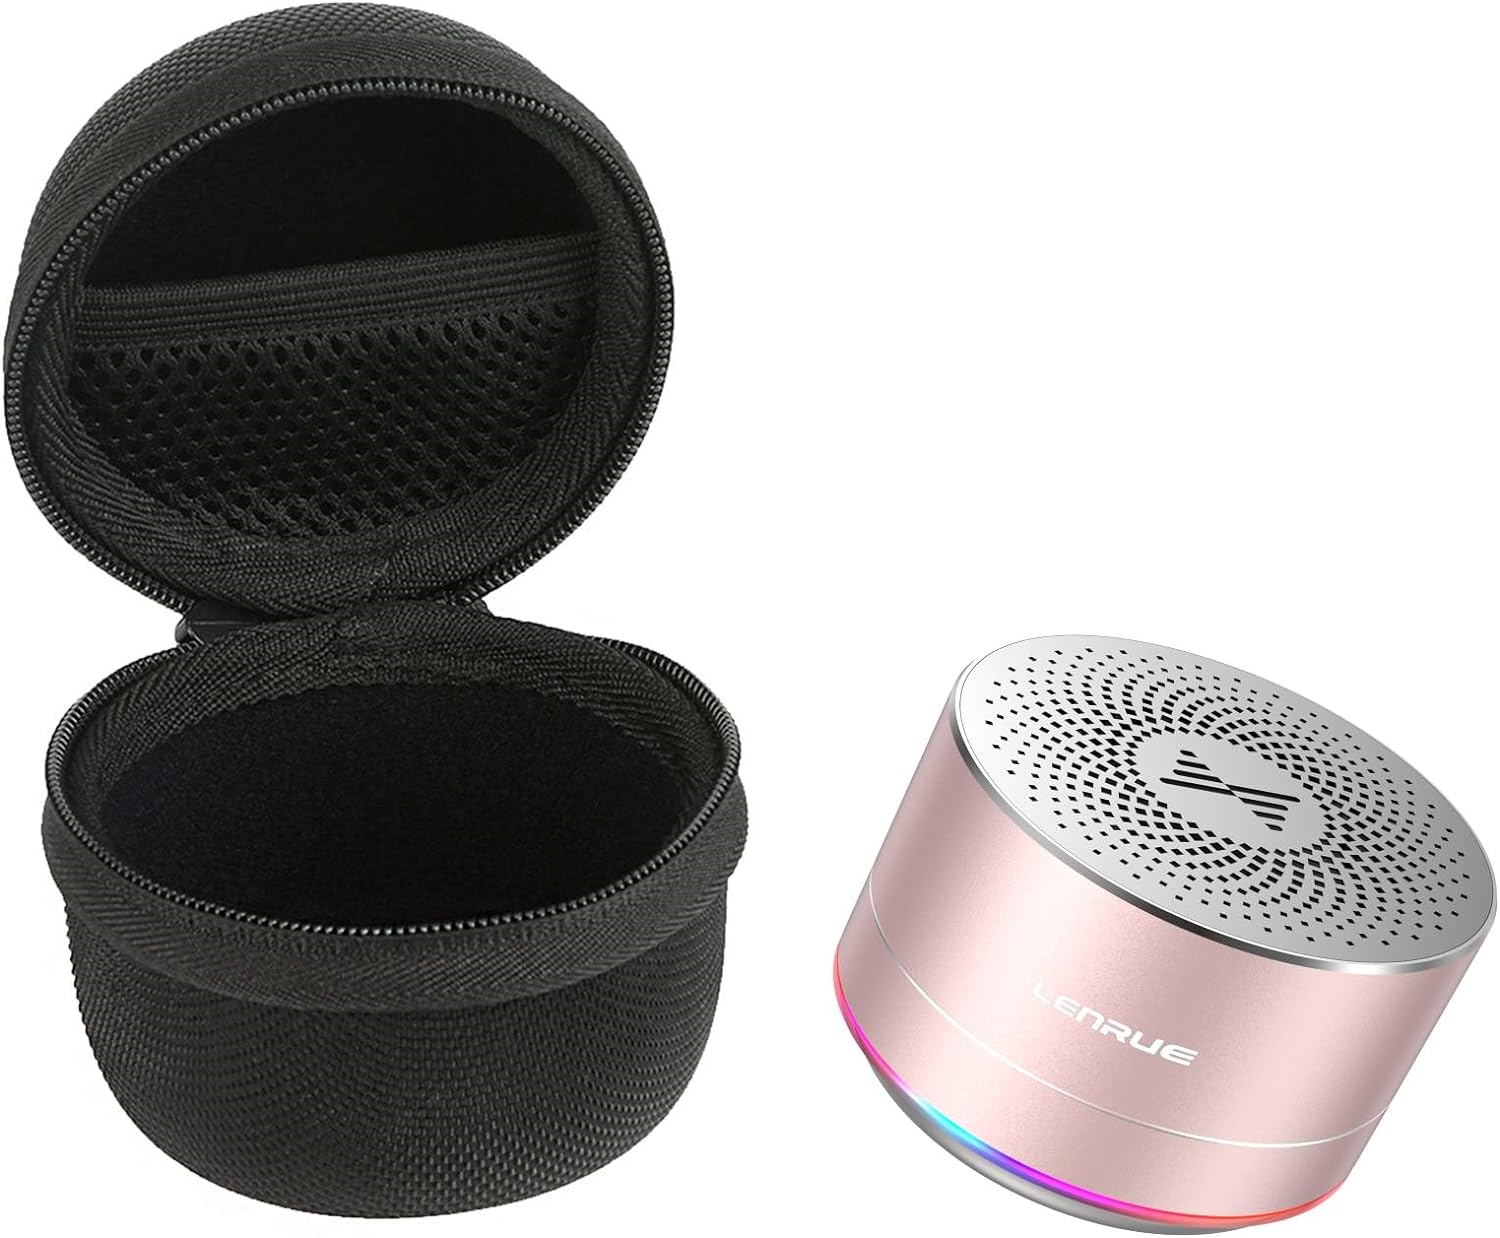 LENRUE Portable Wireless Bluetooth Speaker with Built-in-Mic,Handsfree Call,AUX Line,HD Sound and Bass for iPhone Ipad Android Smartphone and More (Pink+case)